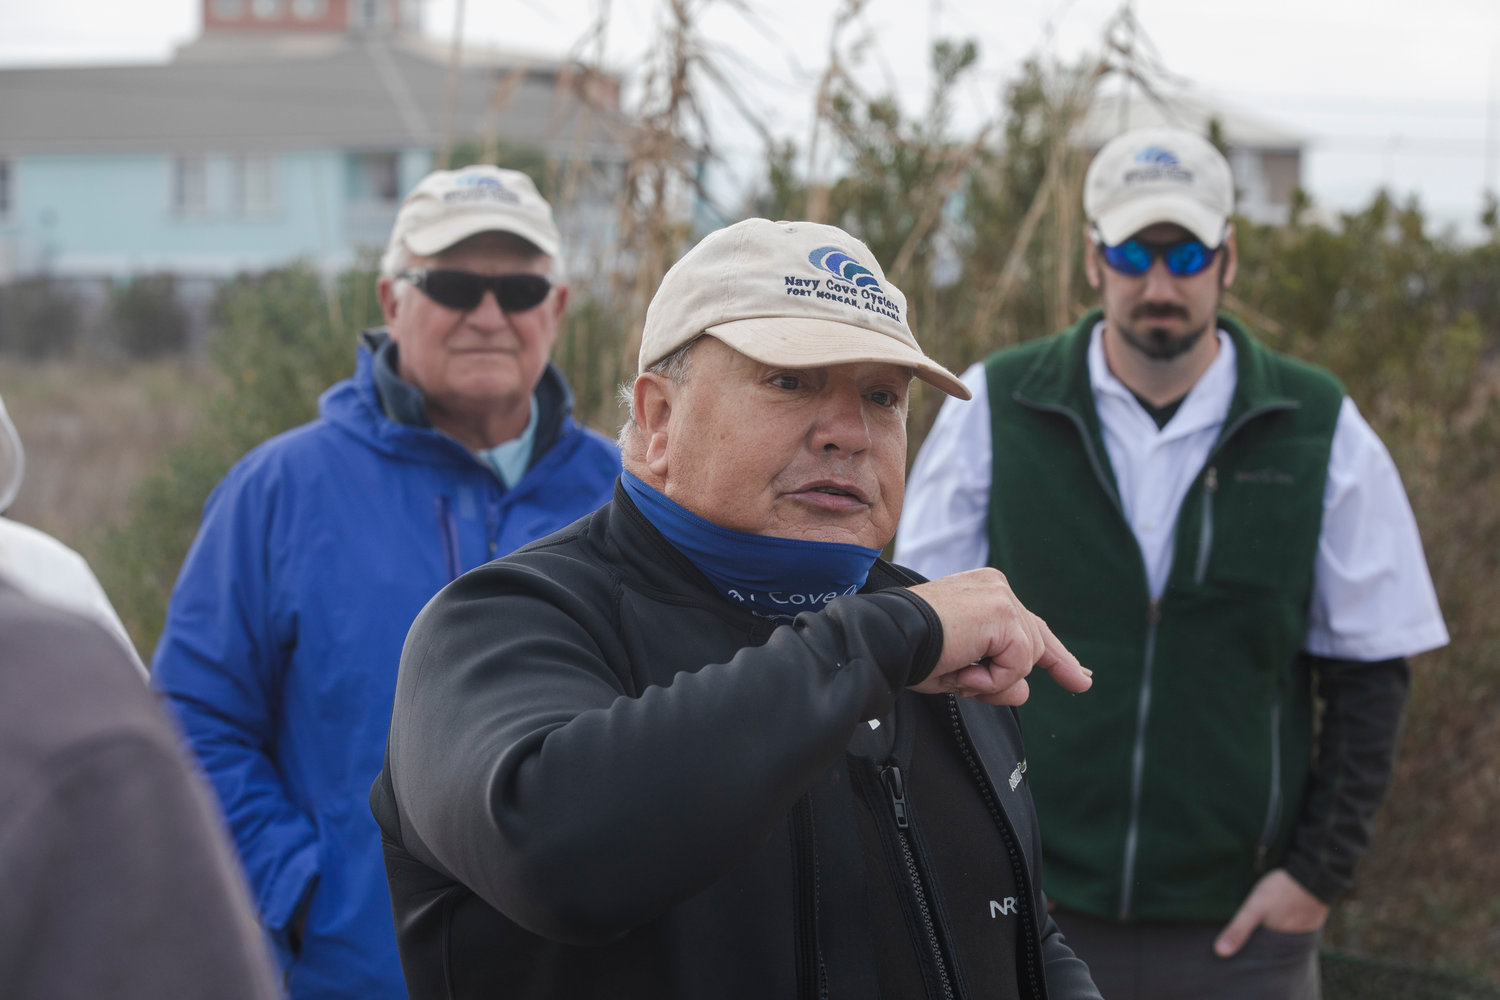 Navy Cove Oysters founders John Supan and Charles Wilson along with partner Eric Bradley speak to a tour group at their farm in mid-January.